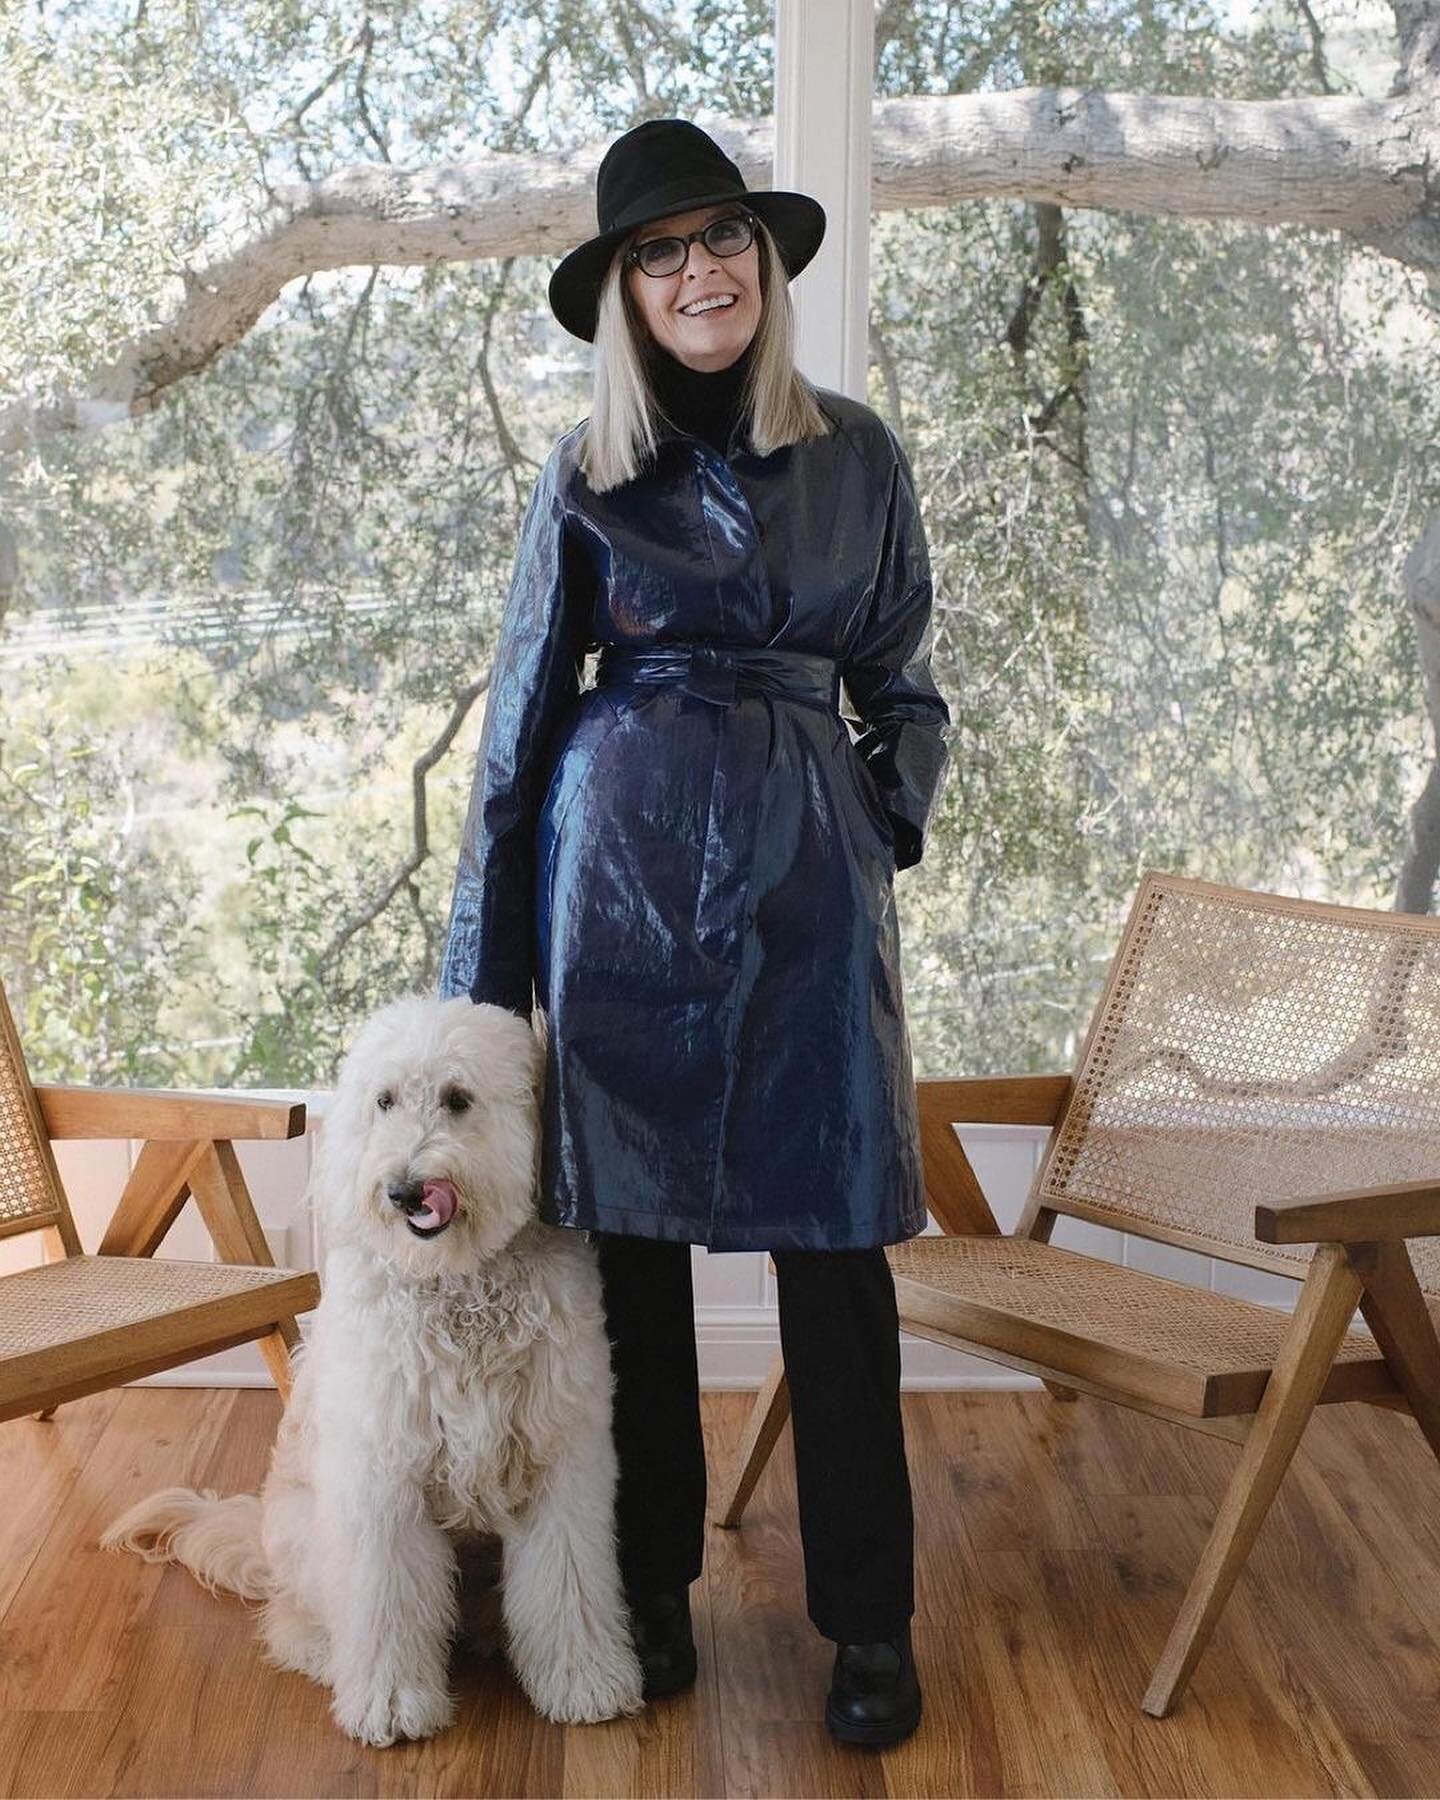 Diane Keaton photographed by @angi_welsch for @jcrew